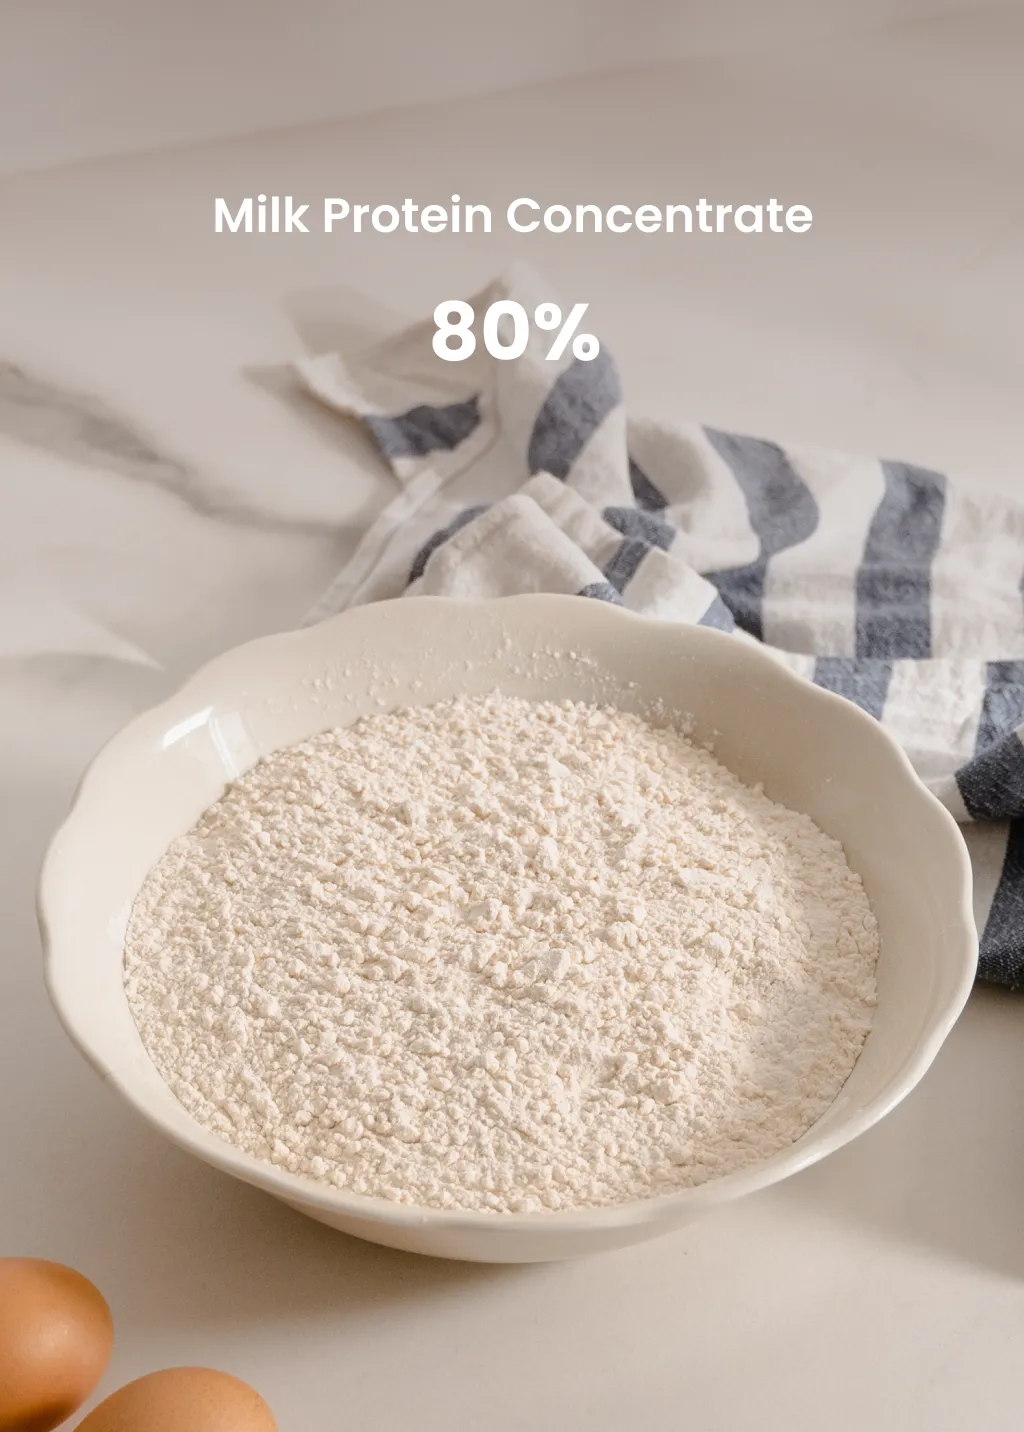 Milk Powder Concentrate 80% from Milk Powder Asia